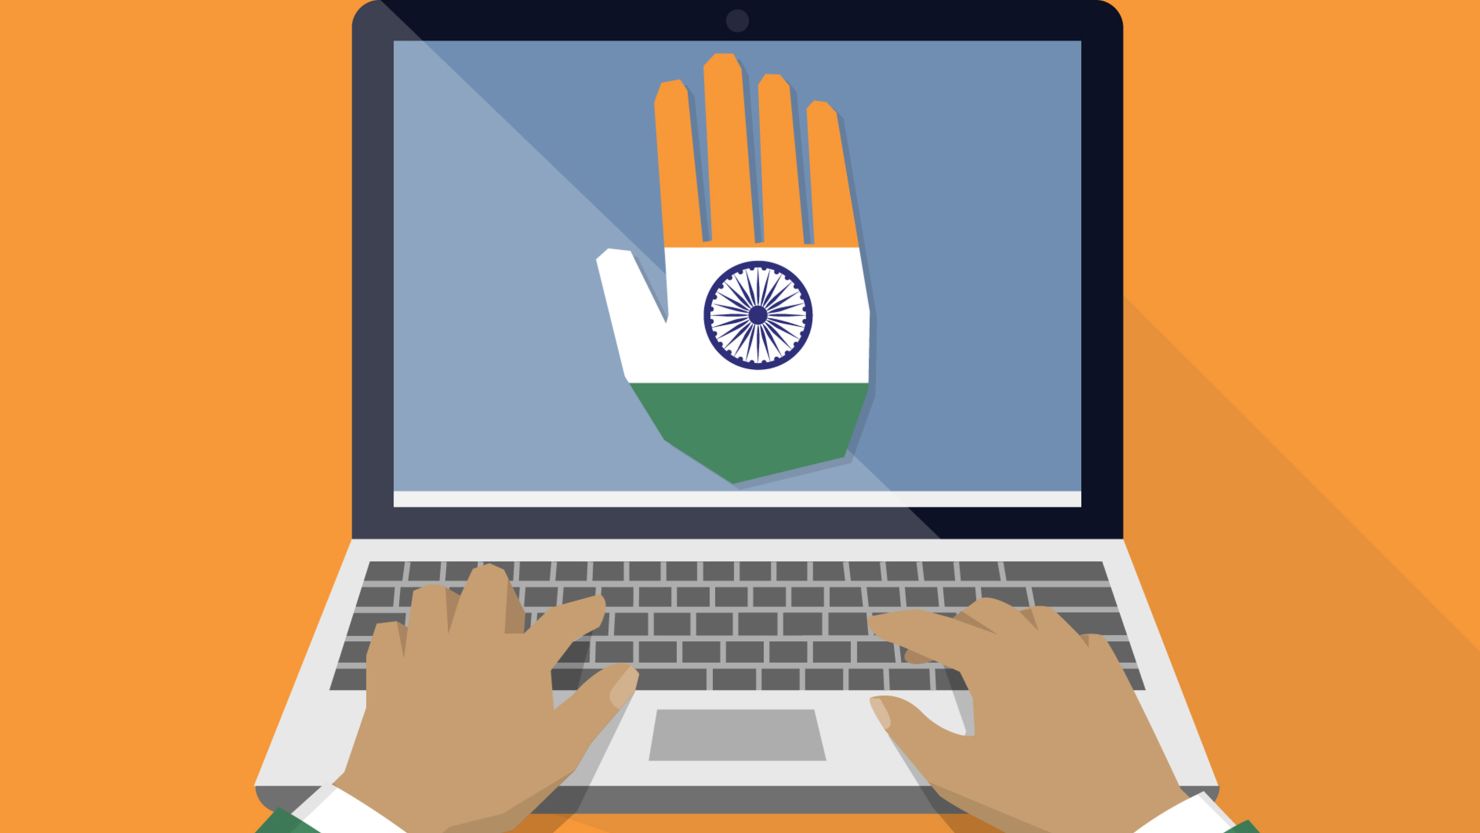 India's Supreme Court has ruled that the country's controversial biometric identity database is constitutional.